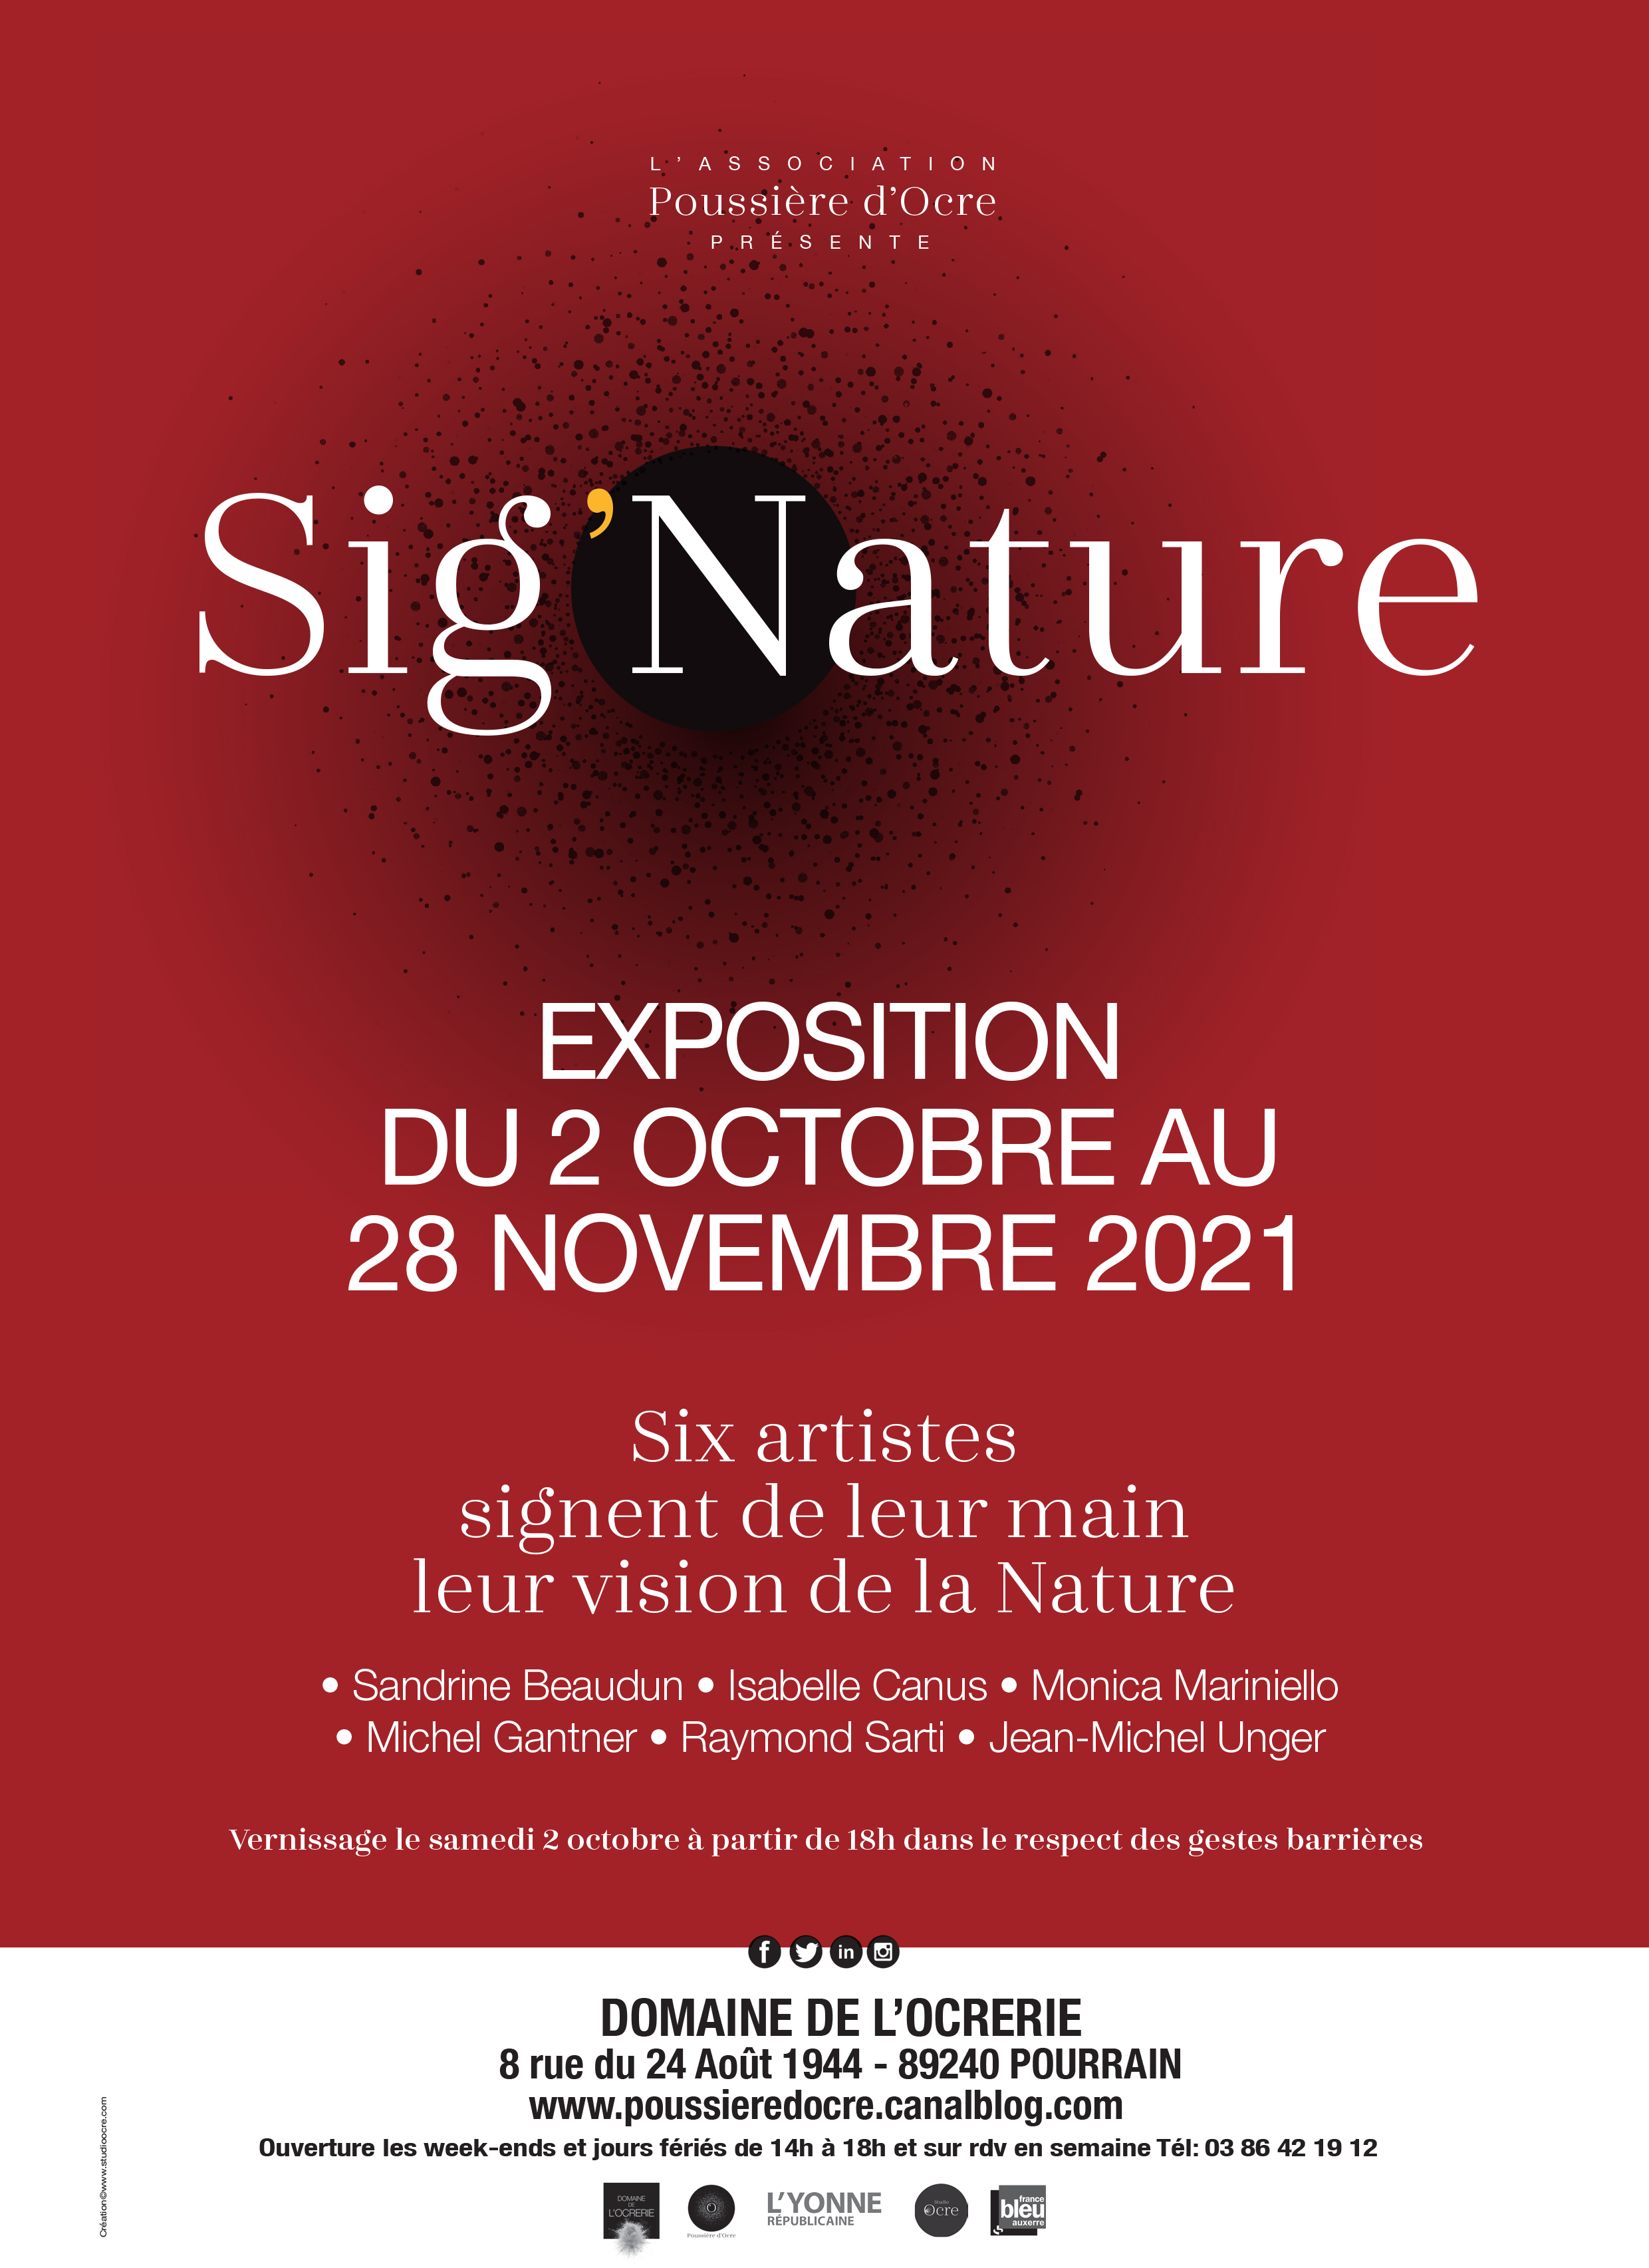 EXPOSITION SIG'NATURE